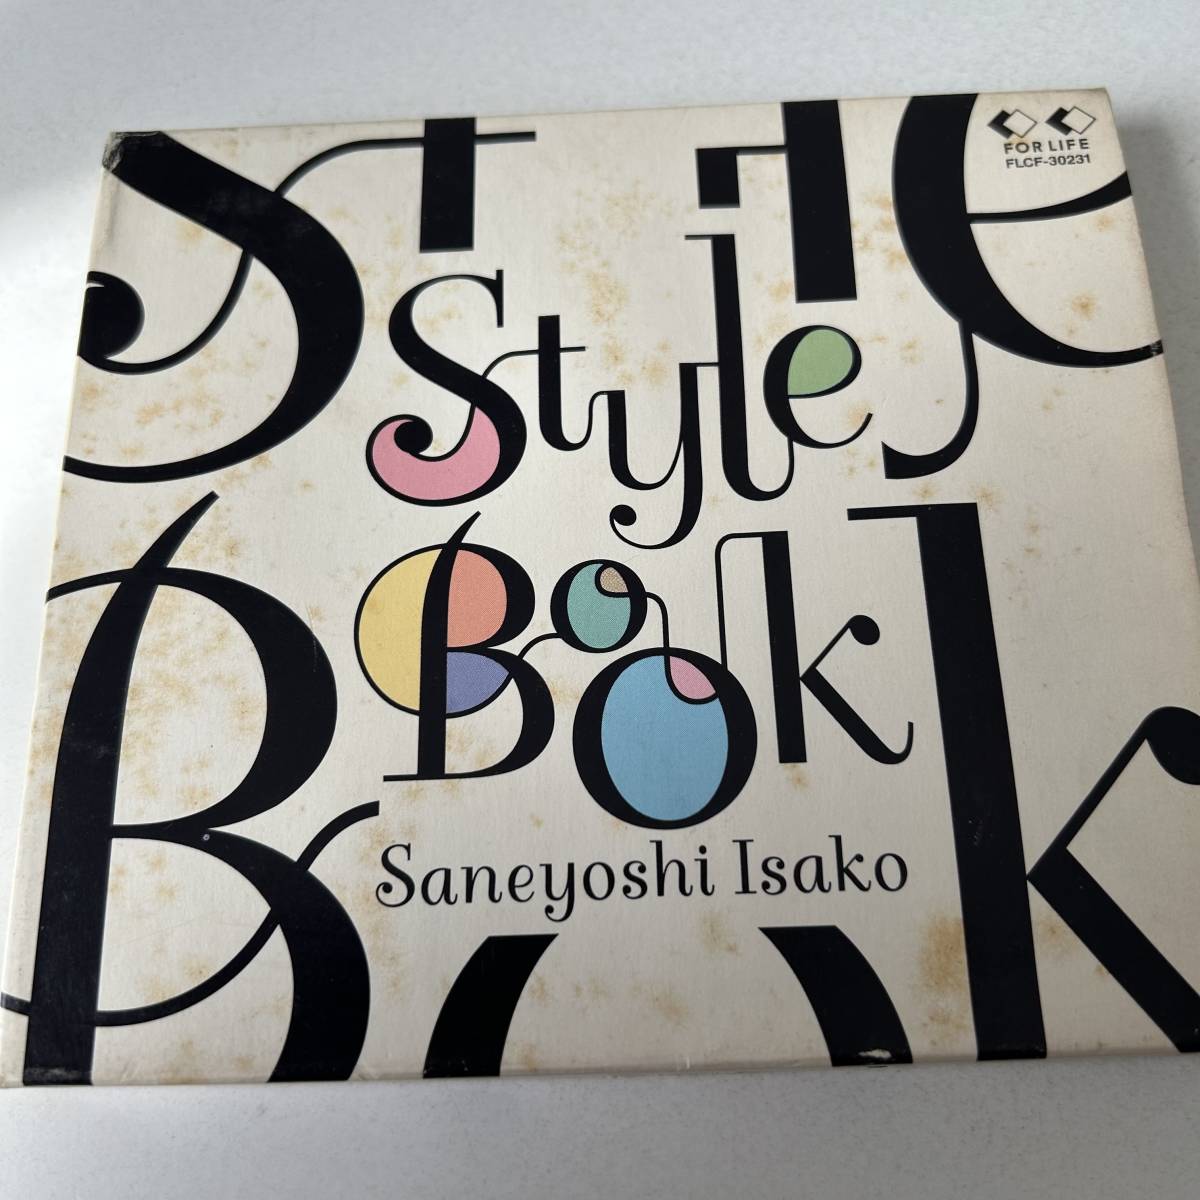  sleeve case specification ## Saneyoshi Isako /STYLE BOOK style * book ## the best album 